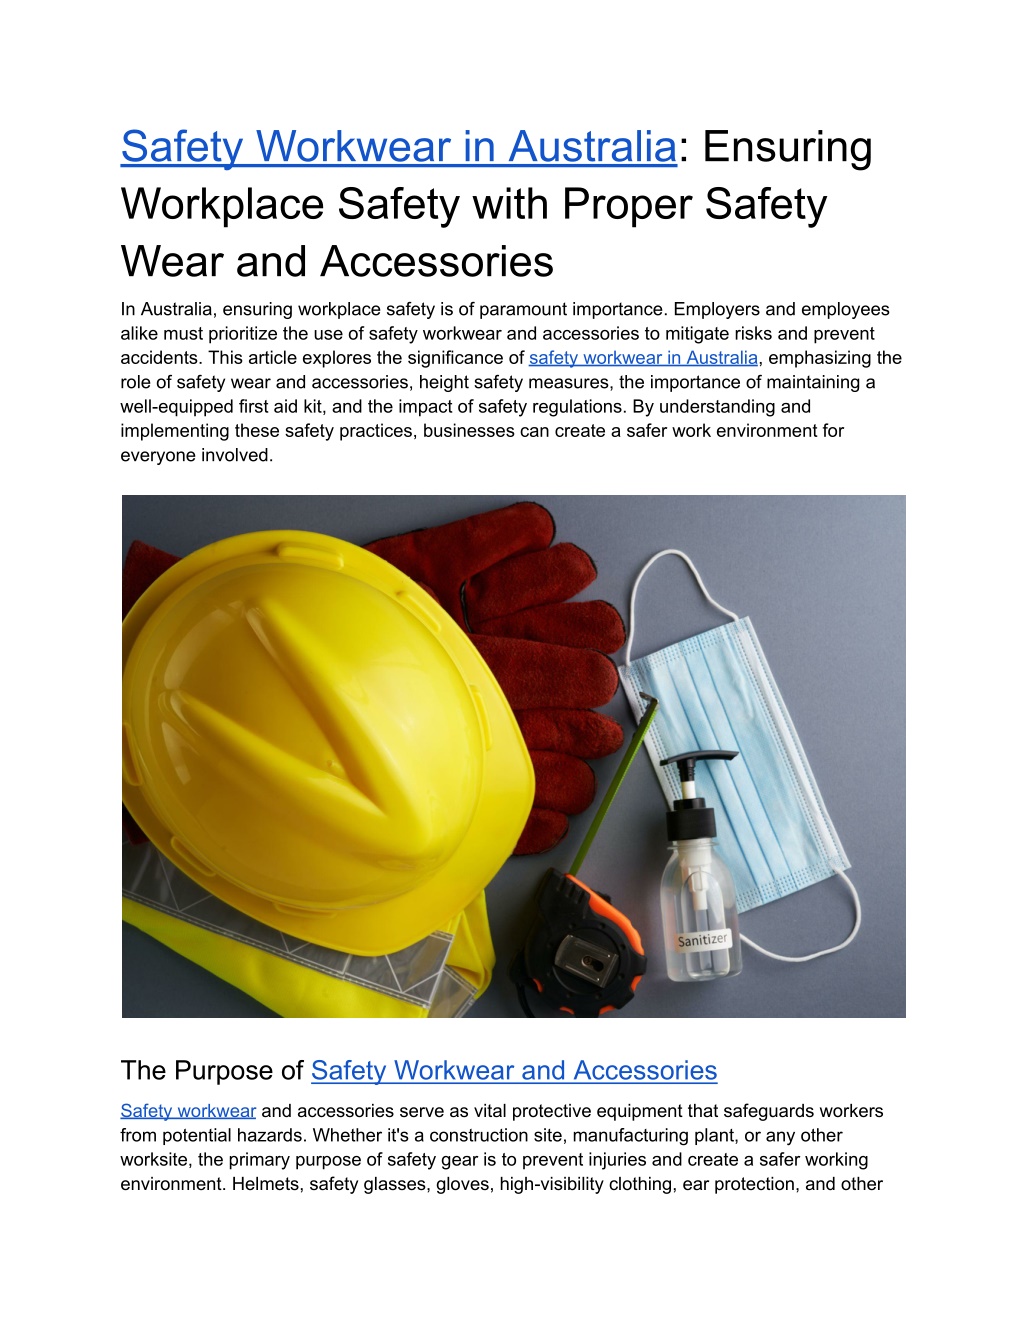 PPT - Safety Workwear in Australia Ensuring Workplace Safety with ...